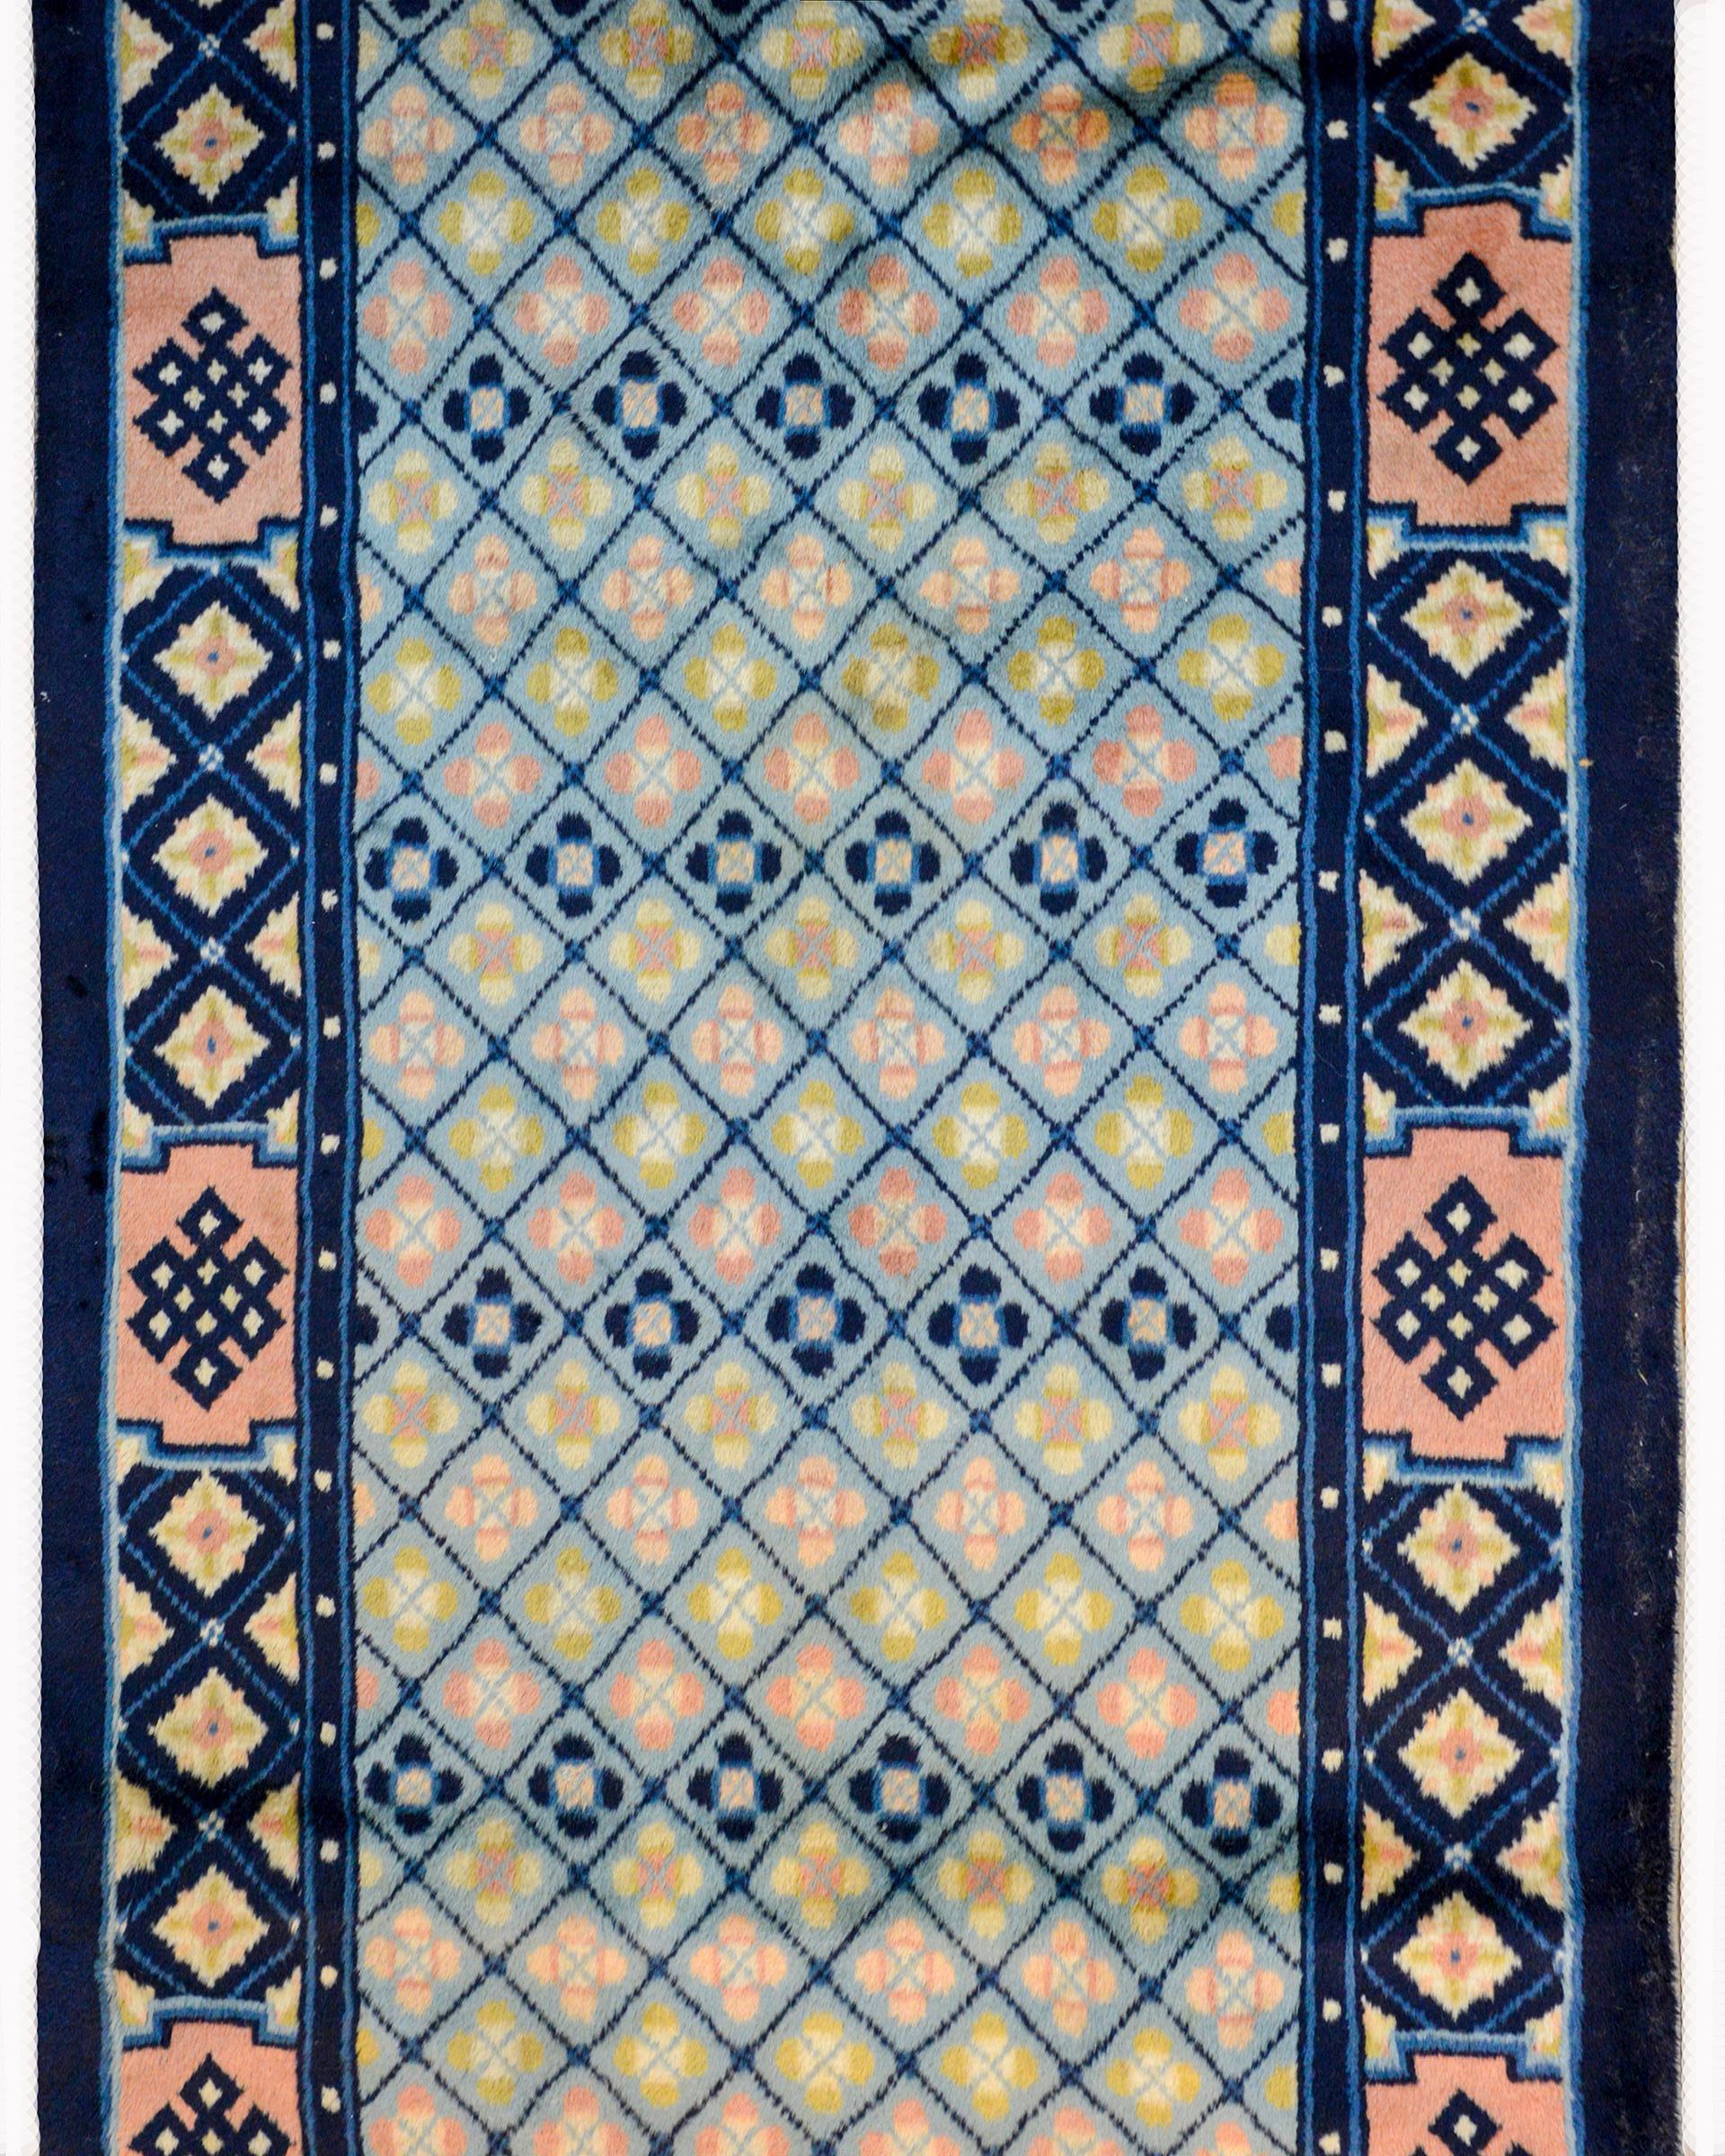 A rare and sweet early 20th century Chinese Peking runner with a field containing an all-over patter of petite flowers woven in pale pinks, greens, and indigos against a light indigo background. The border is unusual too, with a similar petite